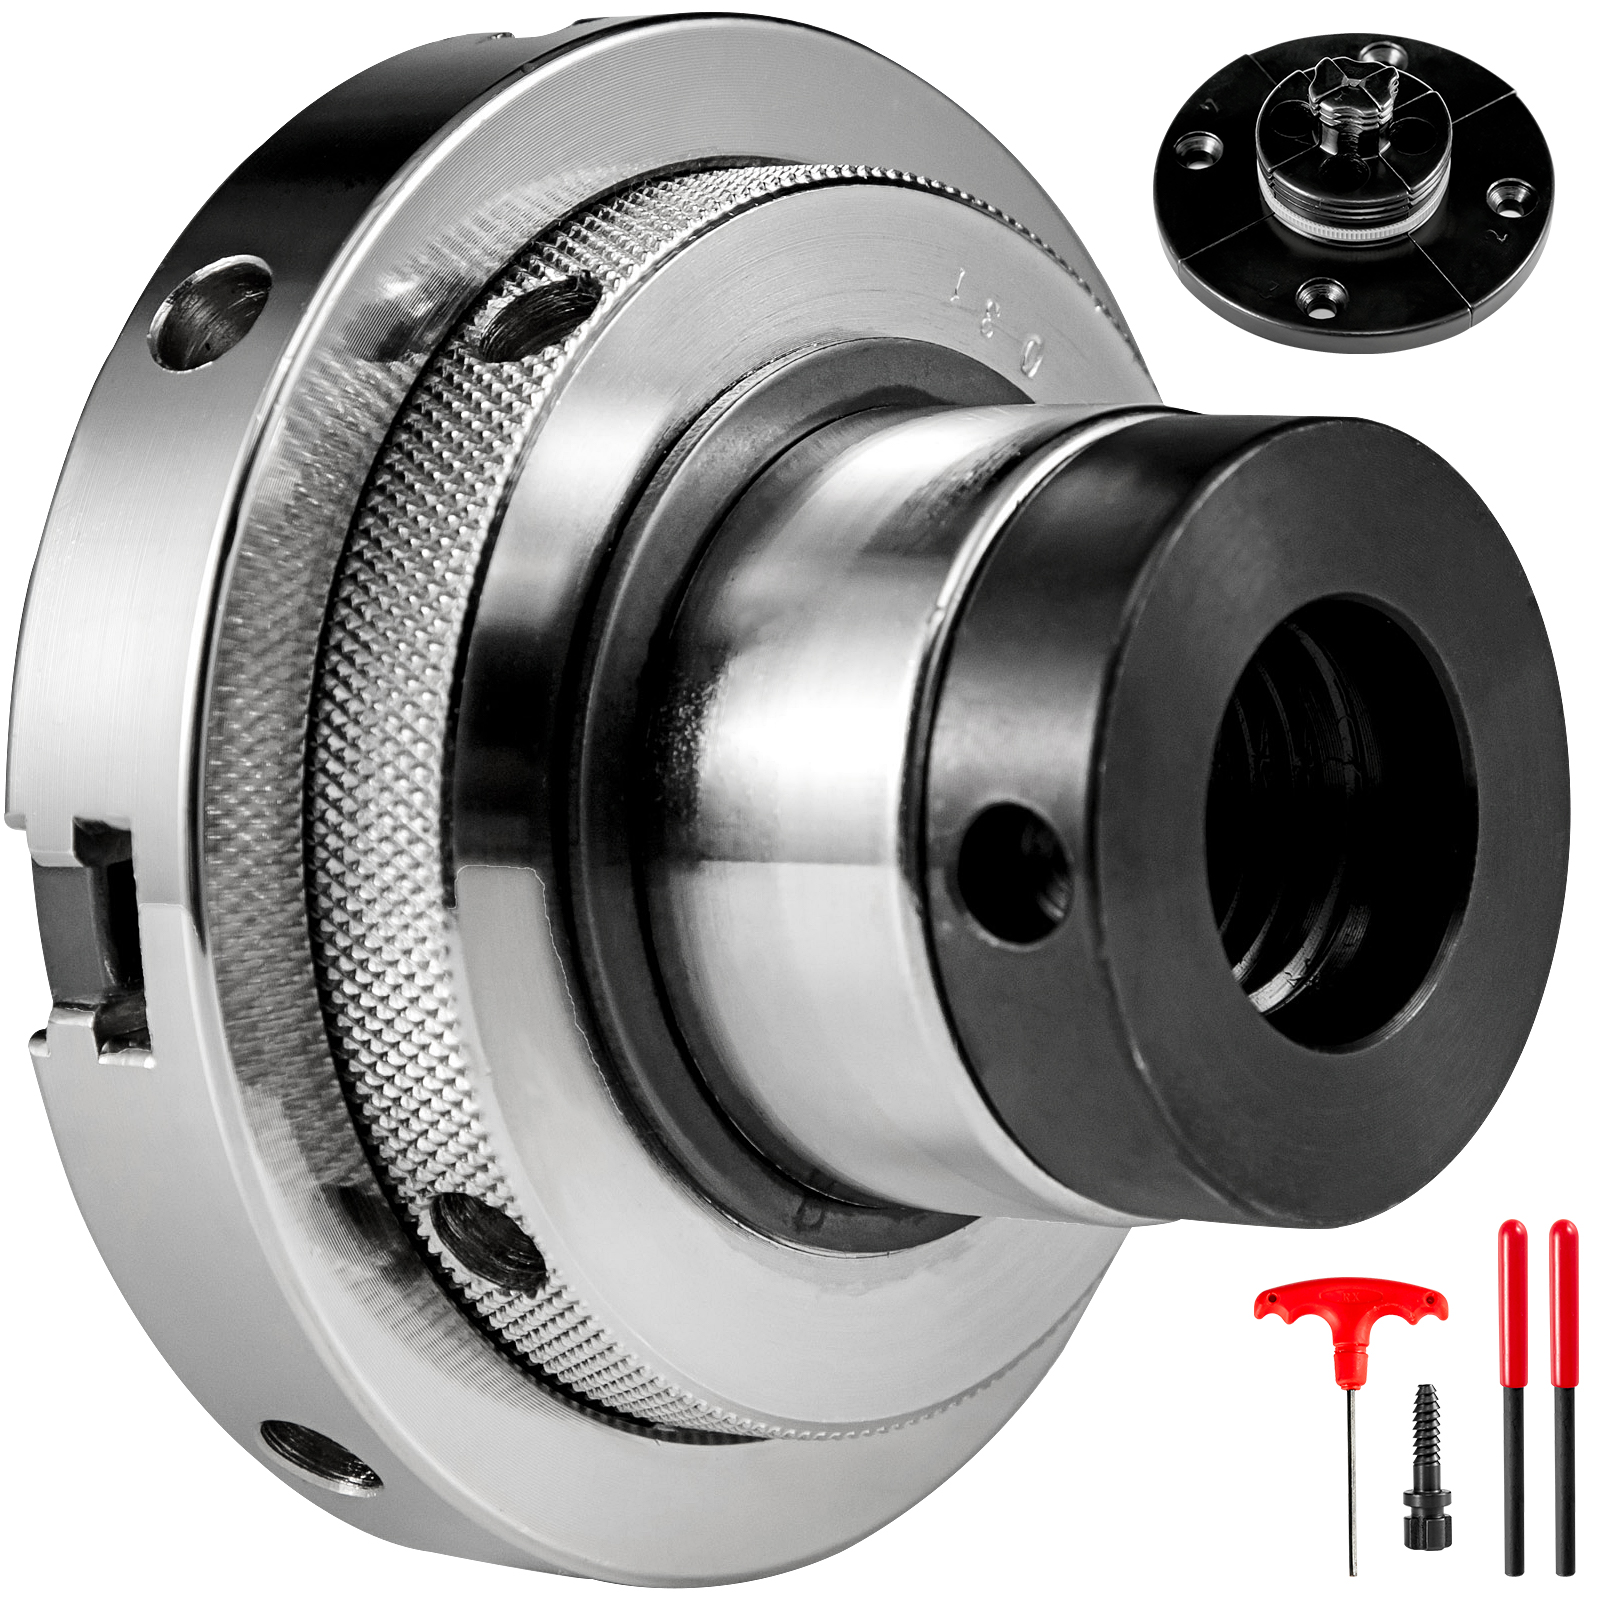 4-inch Self-centering Lathe Chuck Compact Functional Chuck 1inch x 8TPI Thread от Vevor Many GEOs